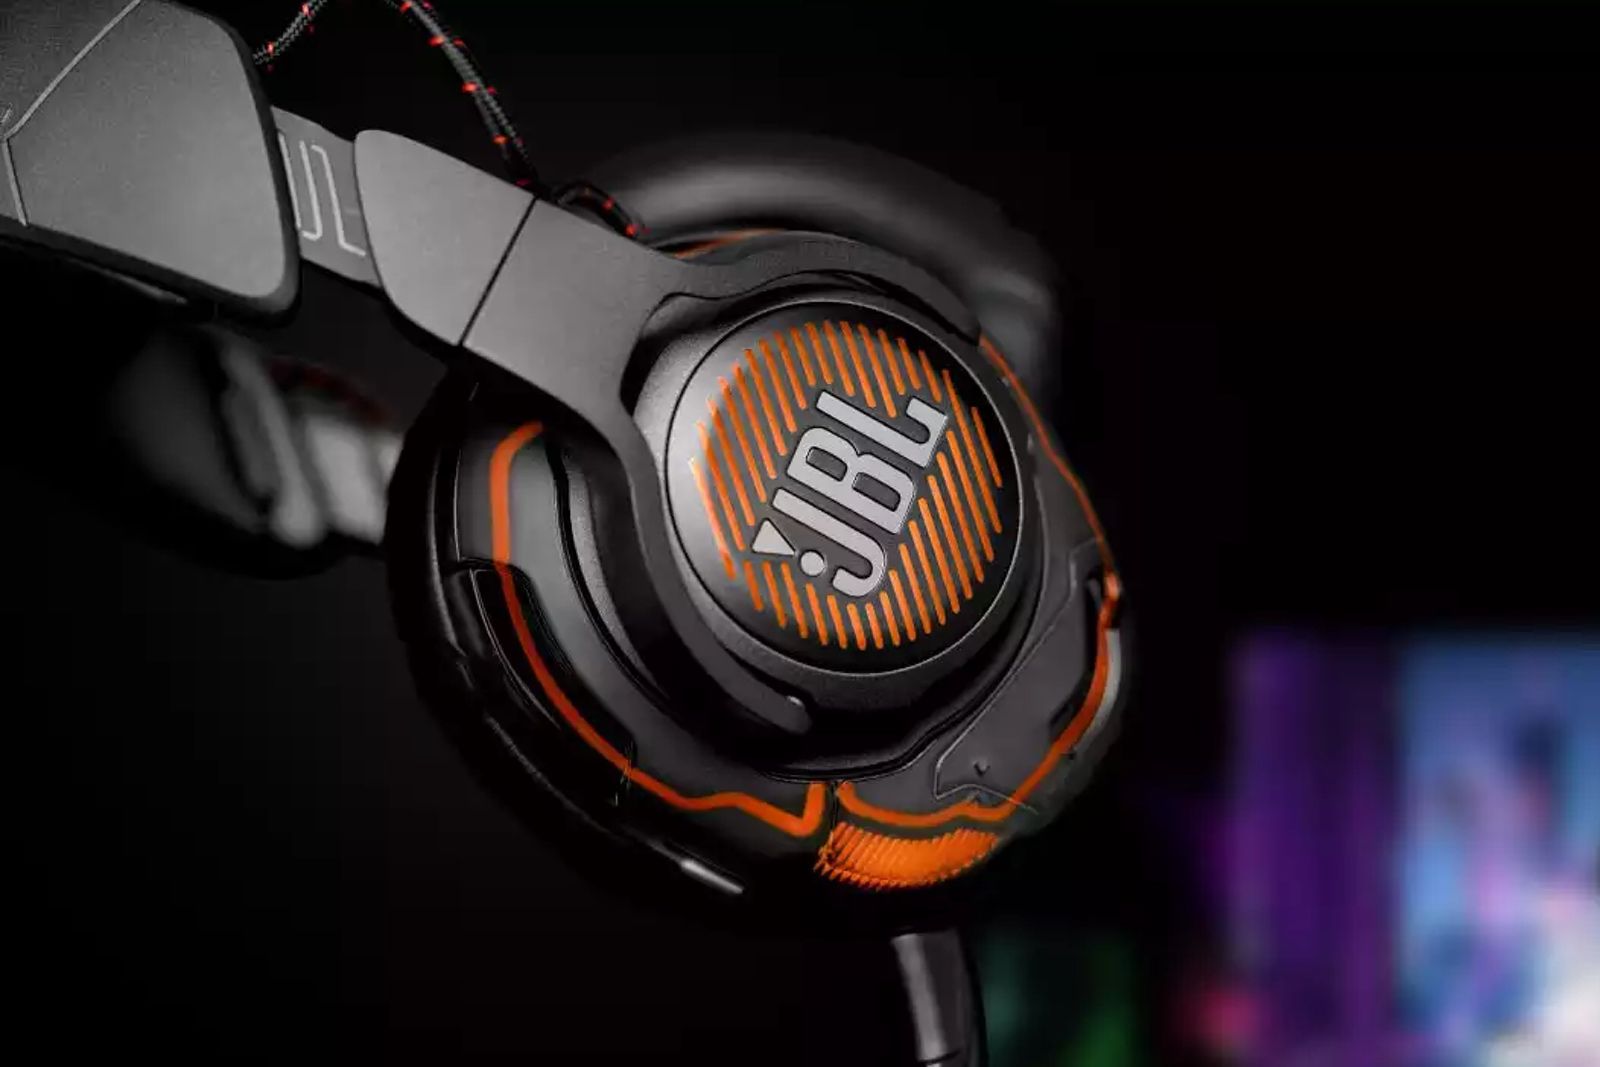 JBL gets into the gaming world with a full range of headsets photo 1